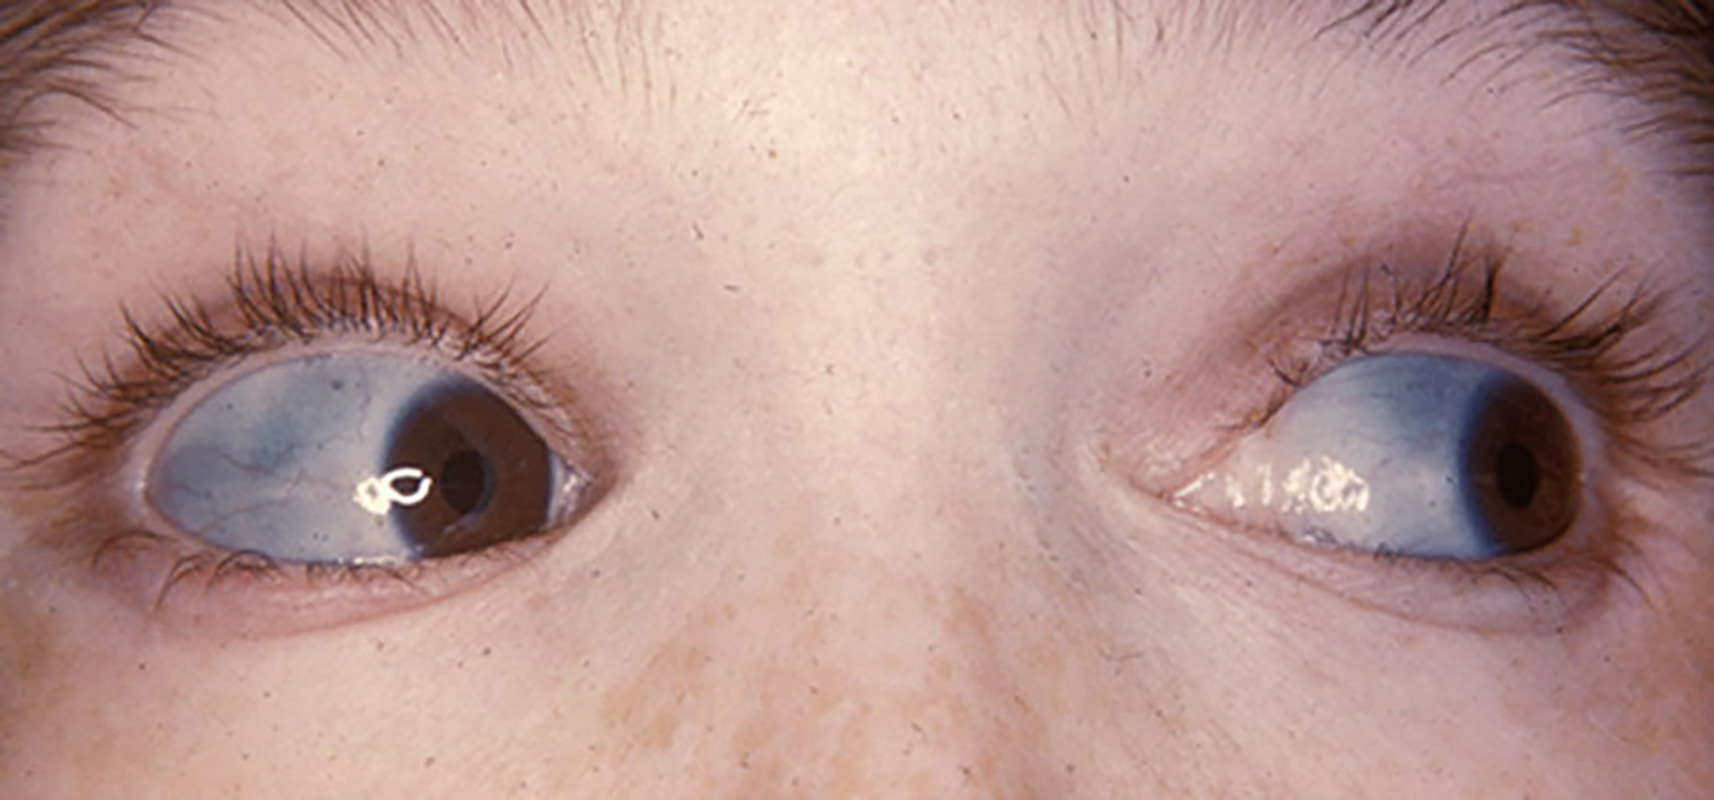 What determines eye color?